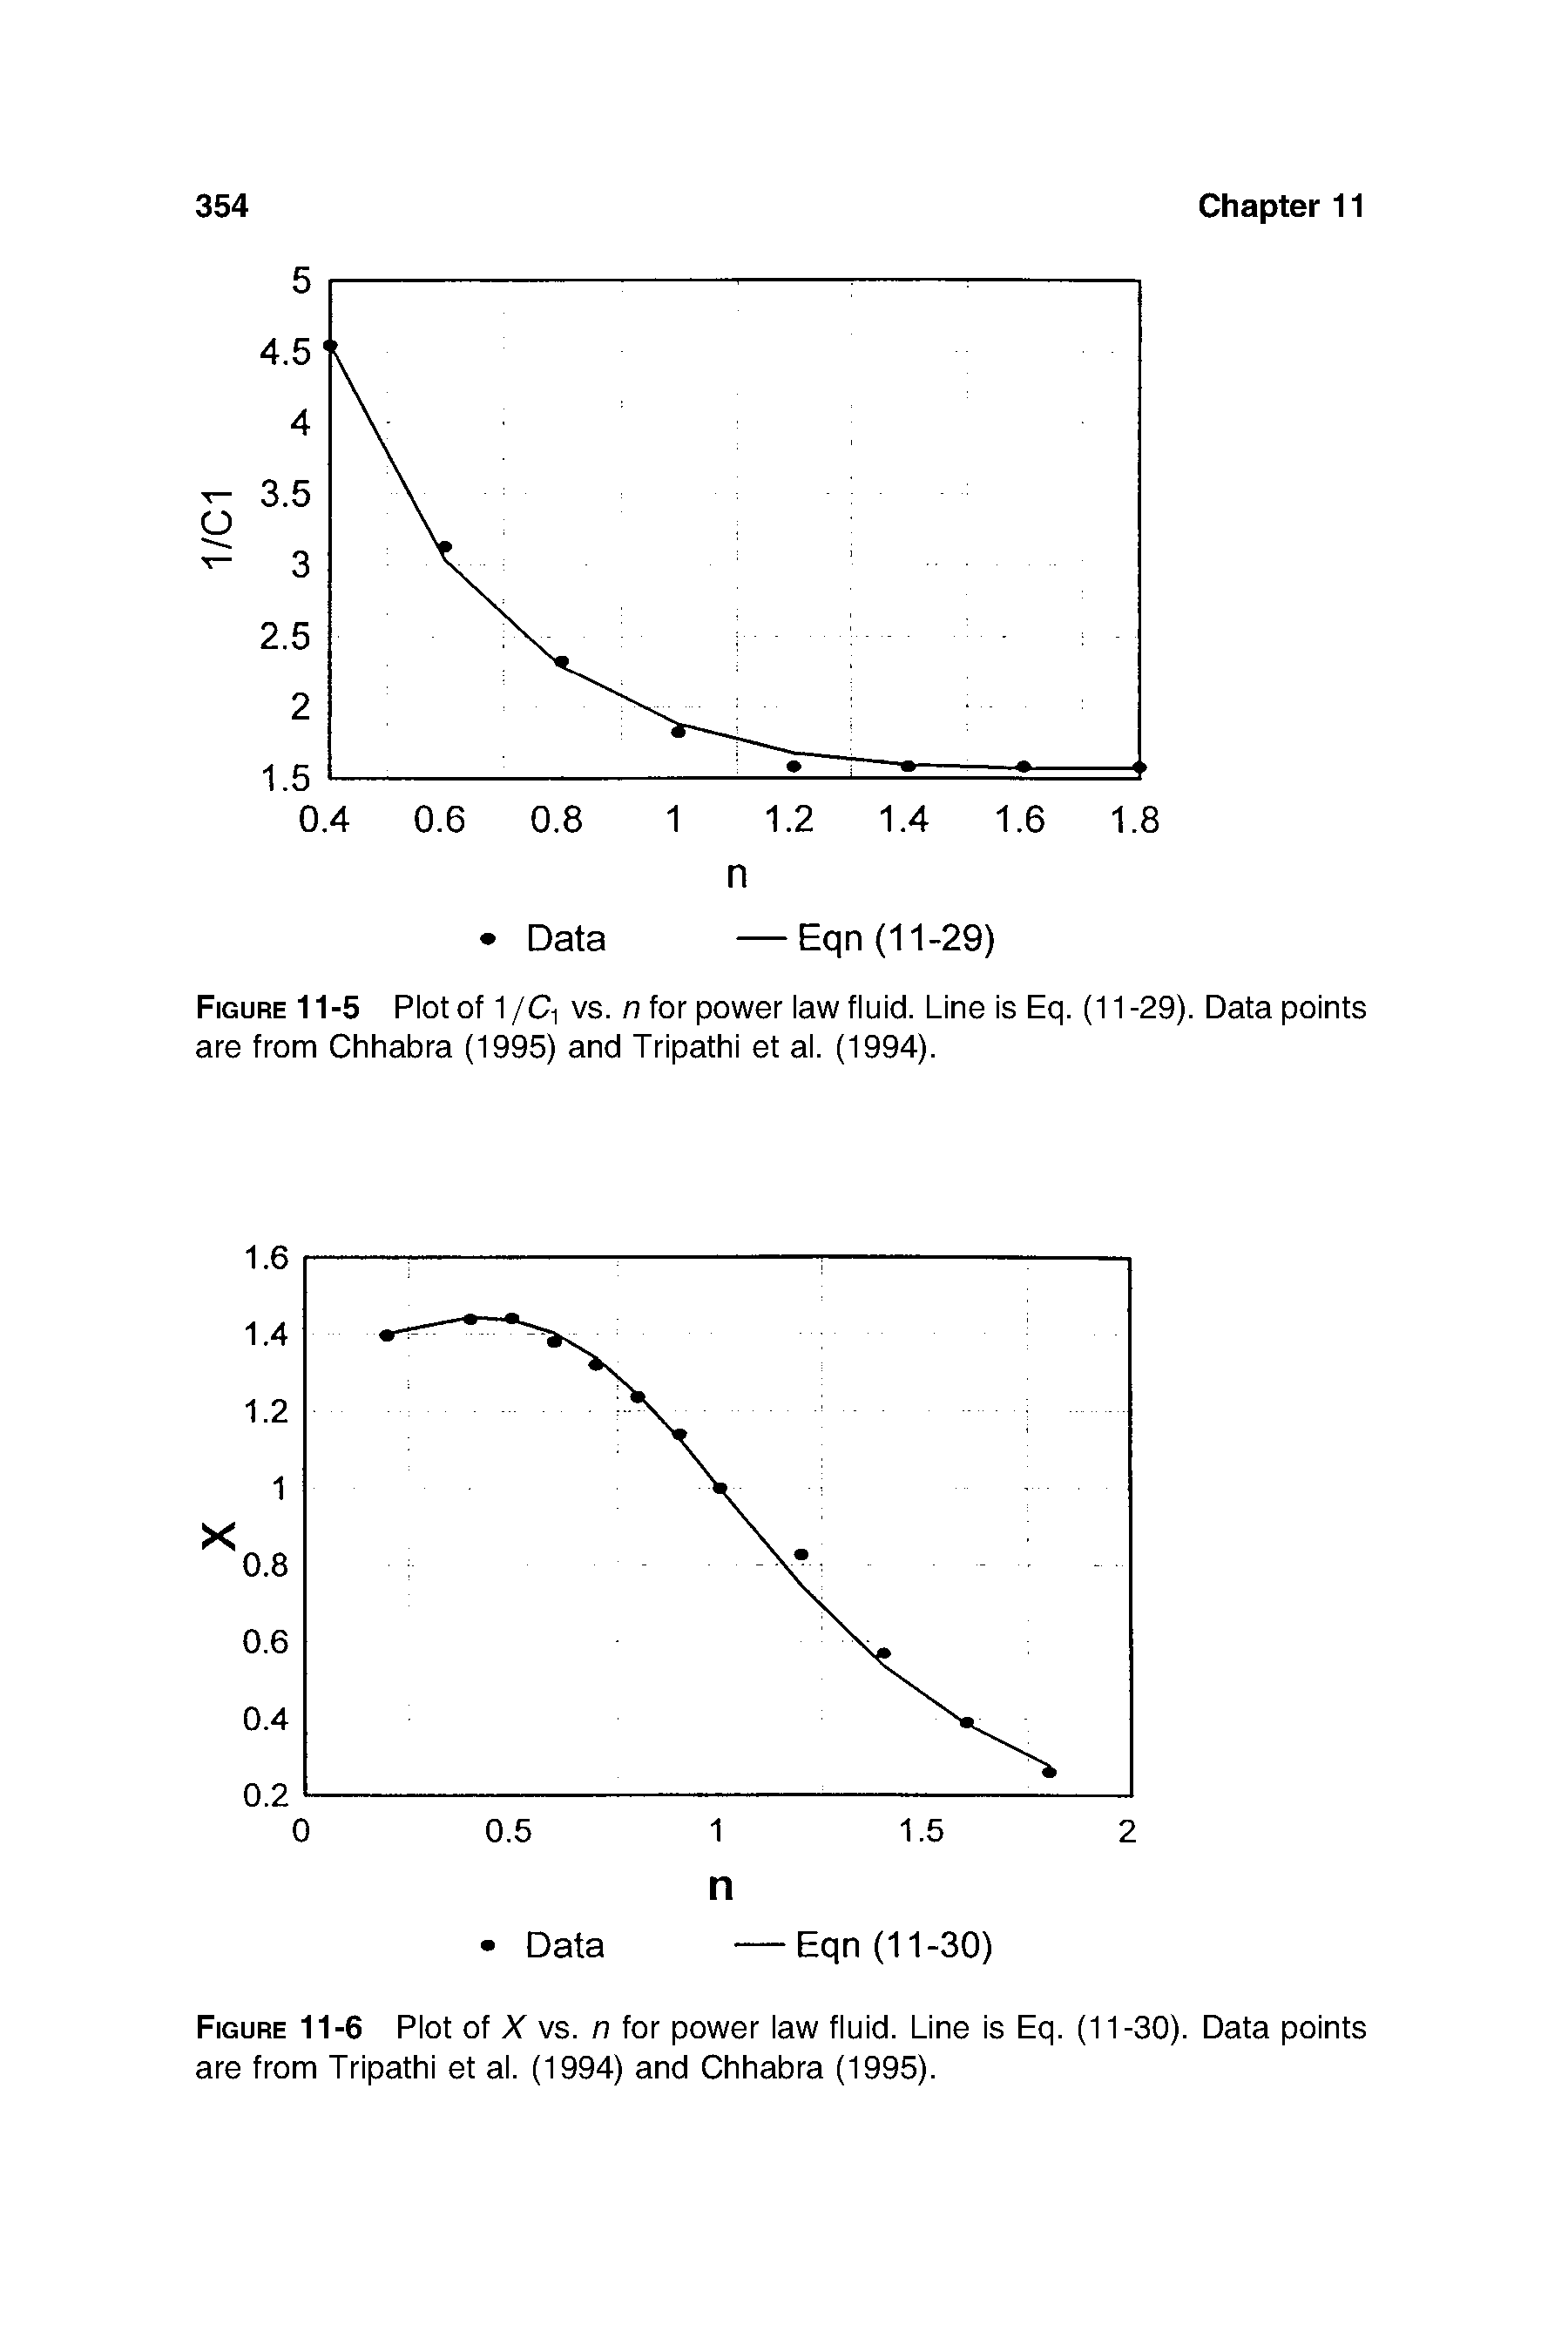 Figure 11-5 Plot of 1 jCy vs. n for power law fluid. Line is Eq. (11 -29). Data points are from Chhabra (1995) and Tripathi et al. (1994).